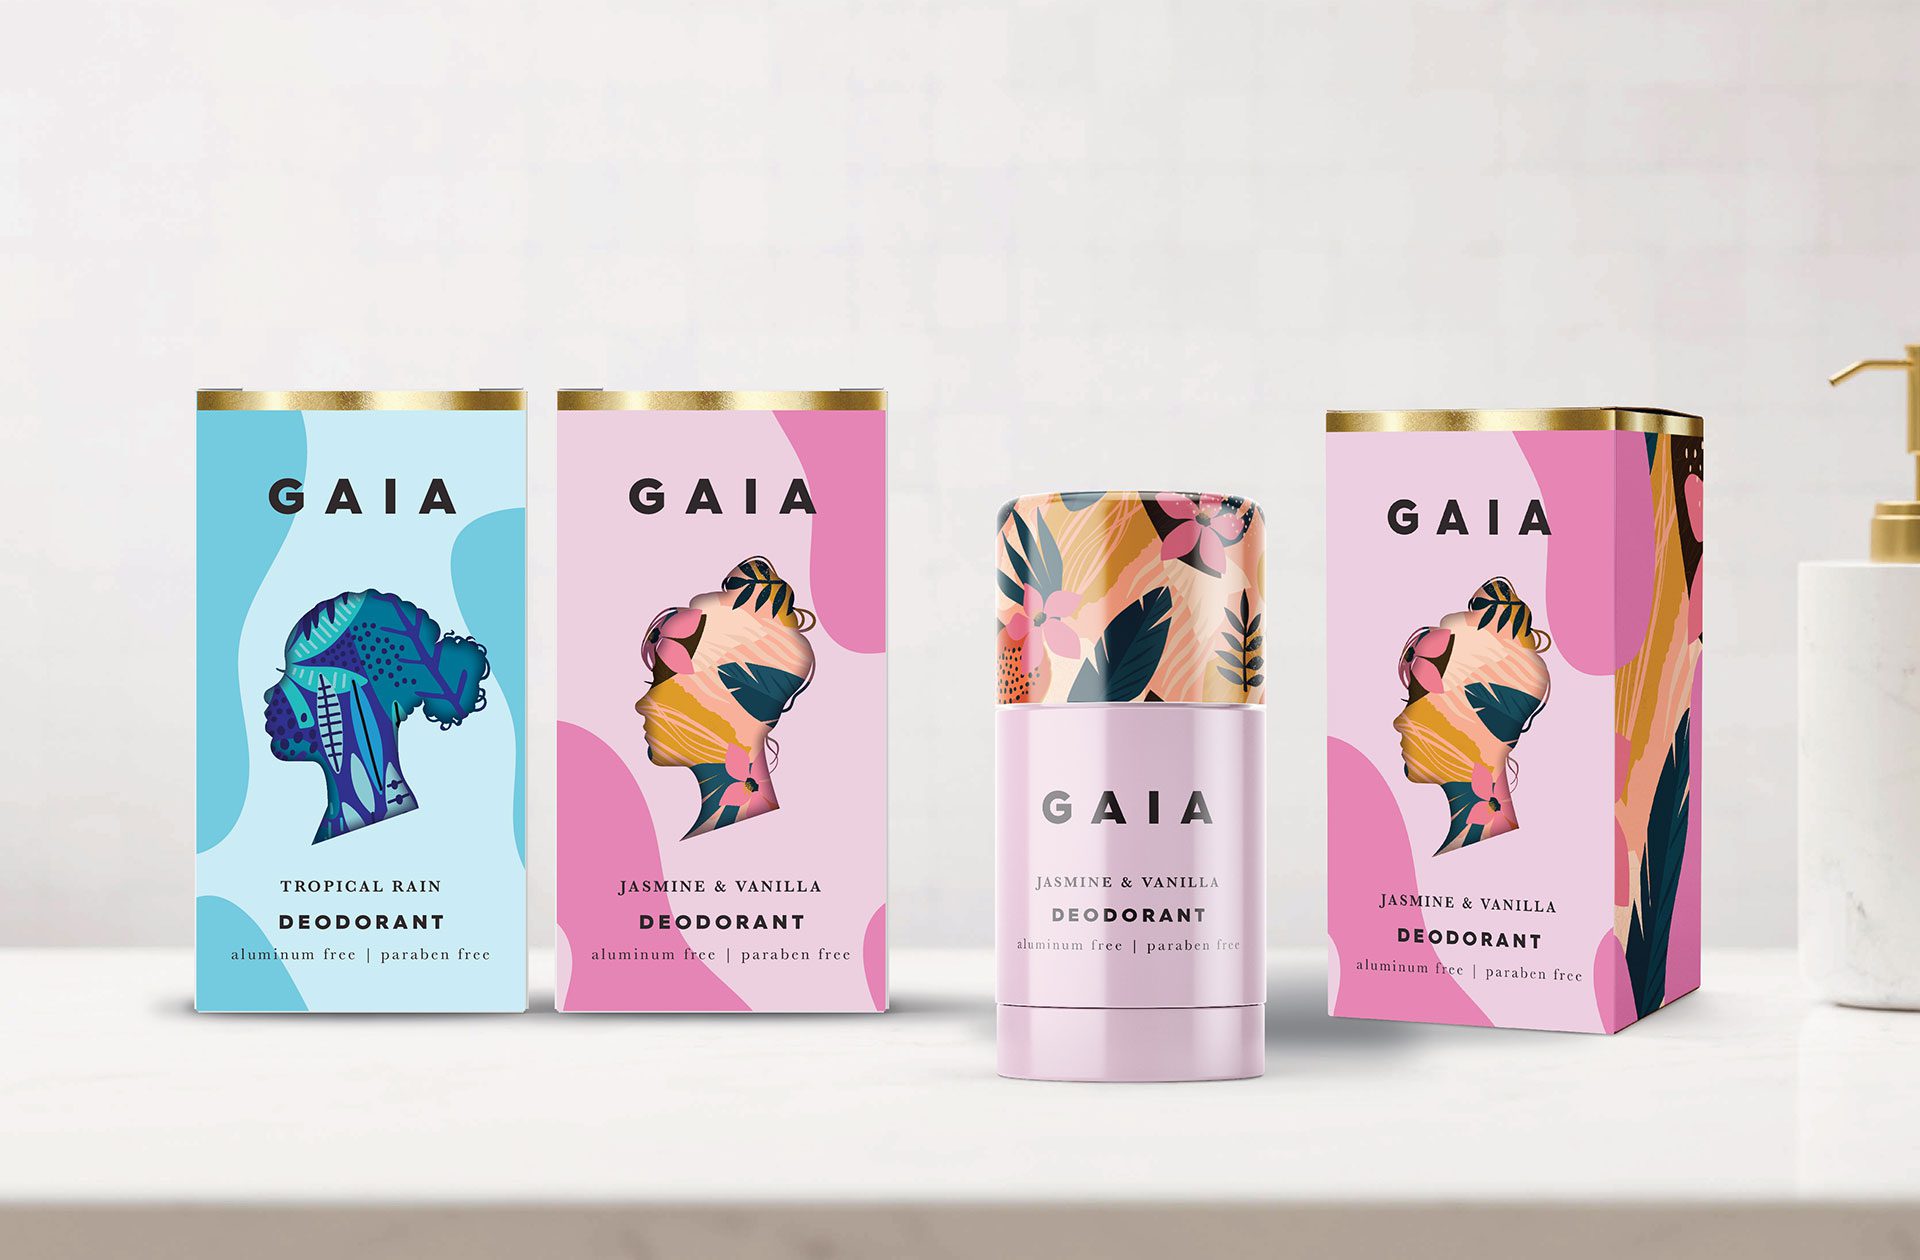 Photograph of a full product line for GAIA deodorants, showcasing packaging design services for consumer packaged goods.